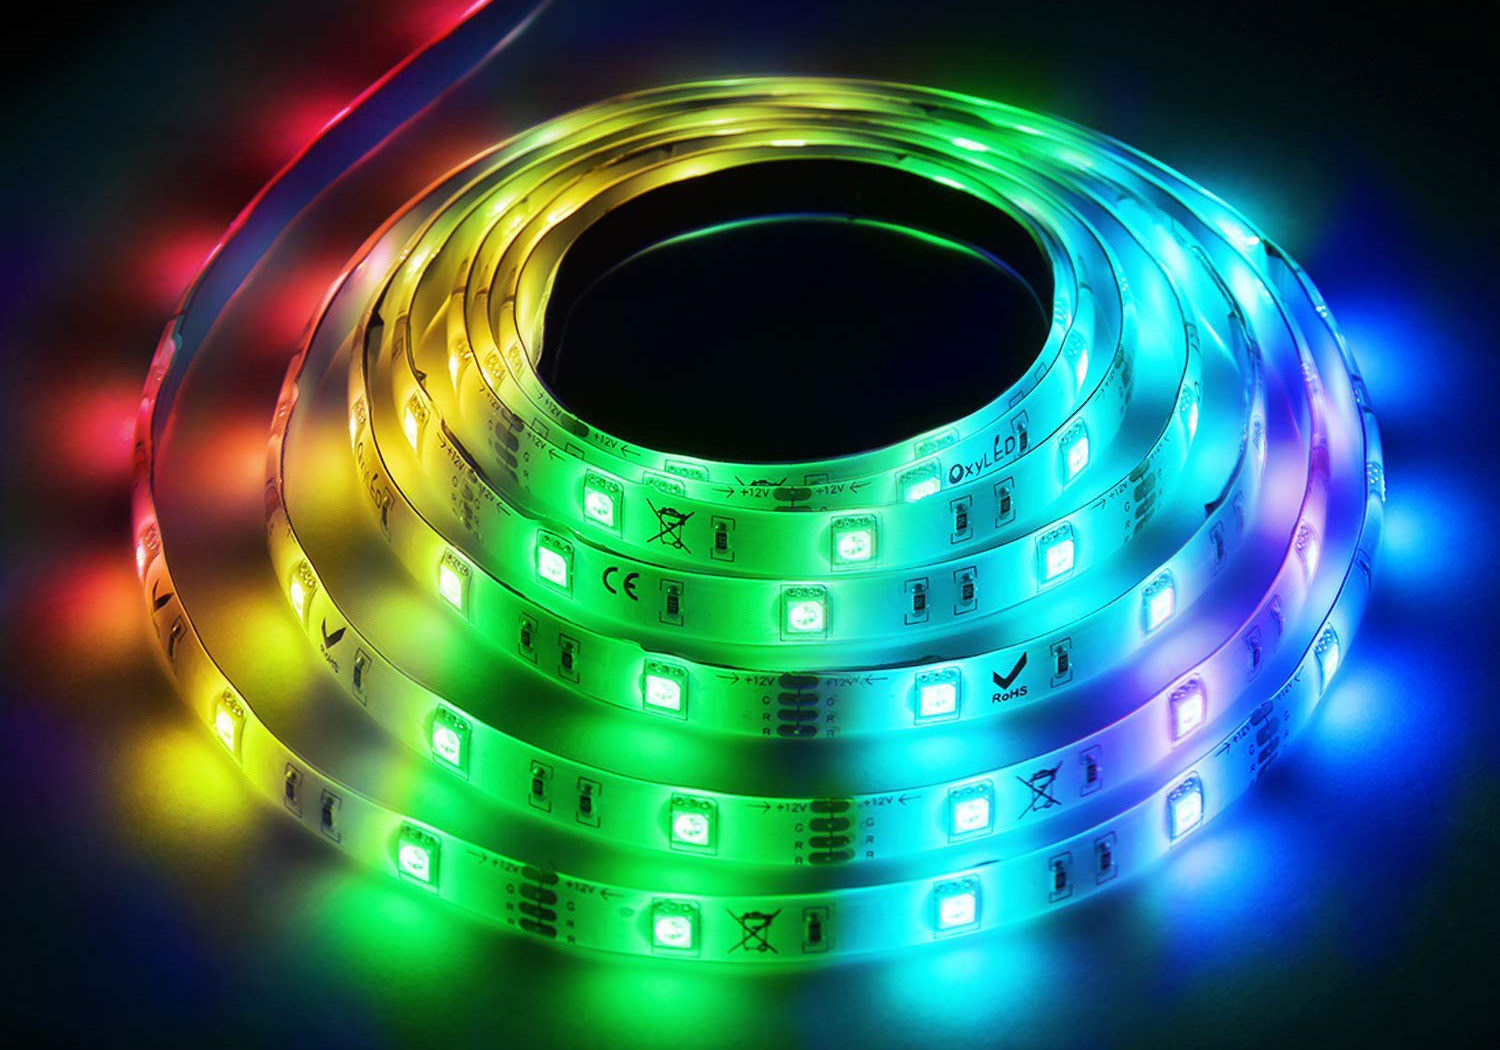 This new LED light strip is just like the Philips Hue’s $90 model, but